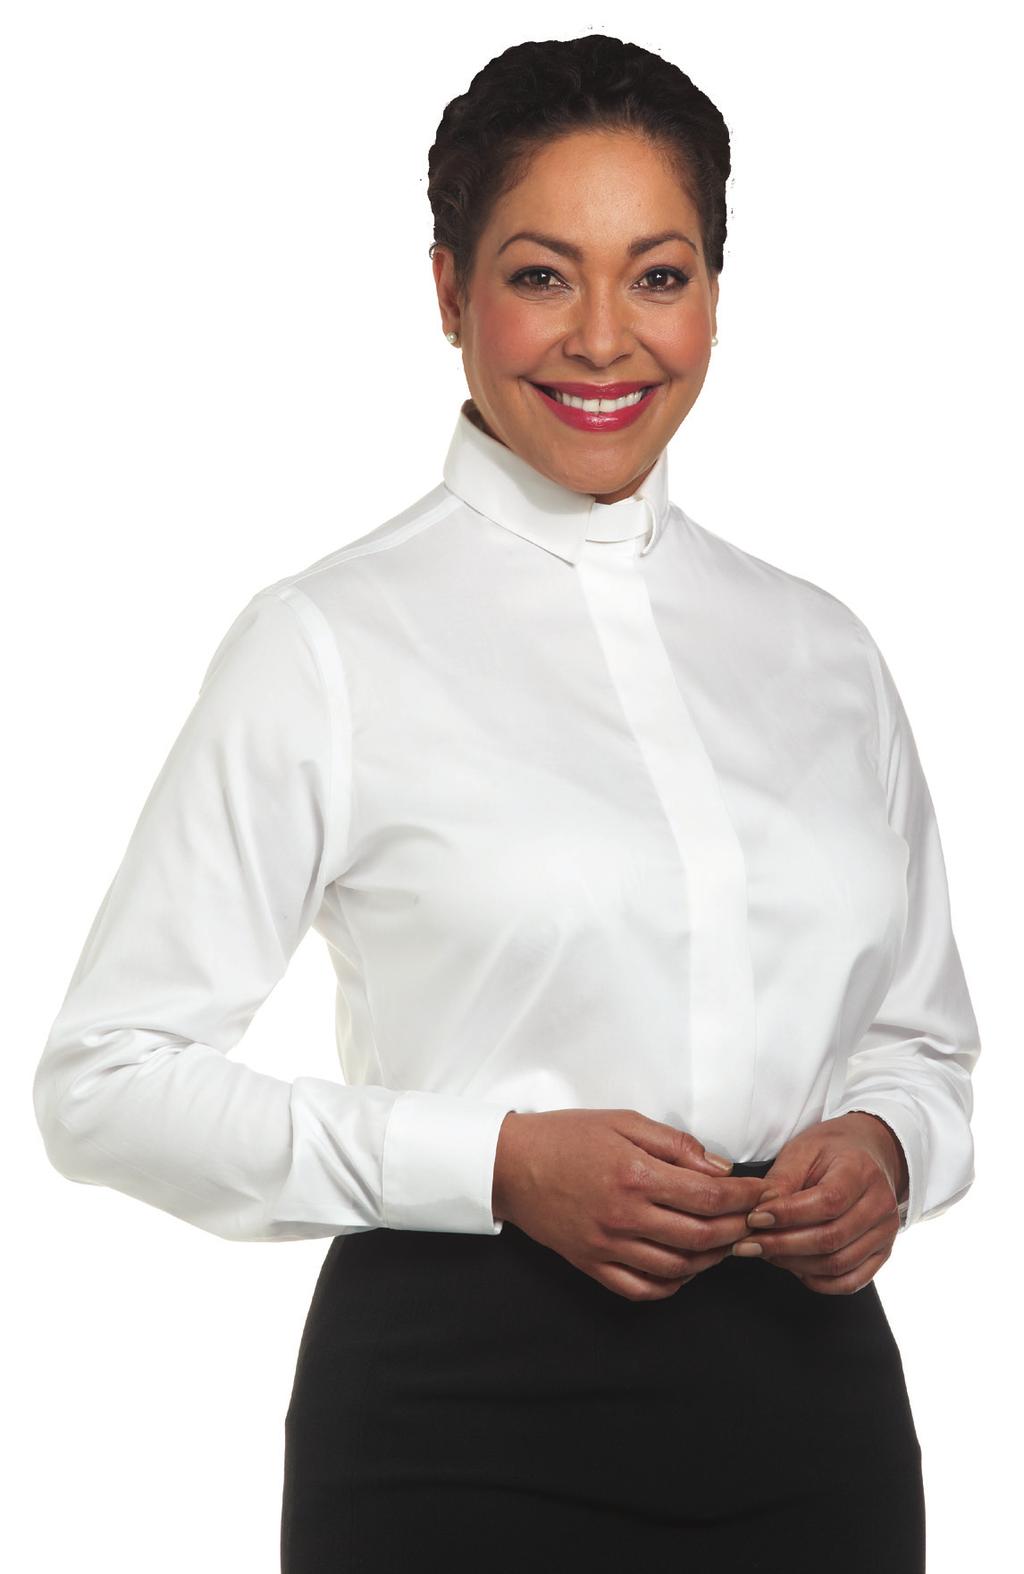 Prices effective January 1, 2018 through December 31, 2019 Women s Long Sleeve Tab Collar Clergy Shirts You ll enjoy the look and comfort of these clergy shirts, tailored in machine washable